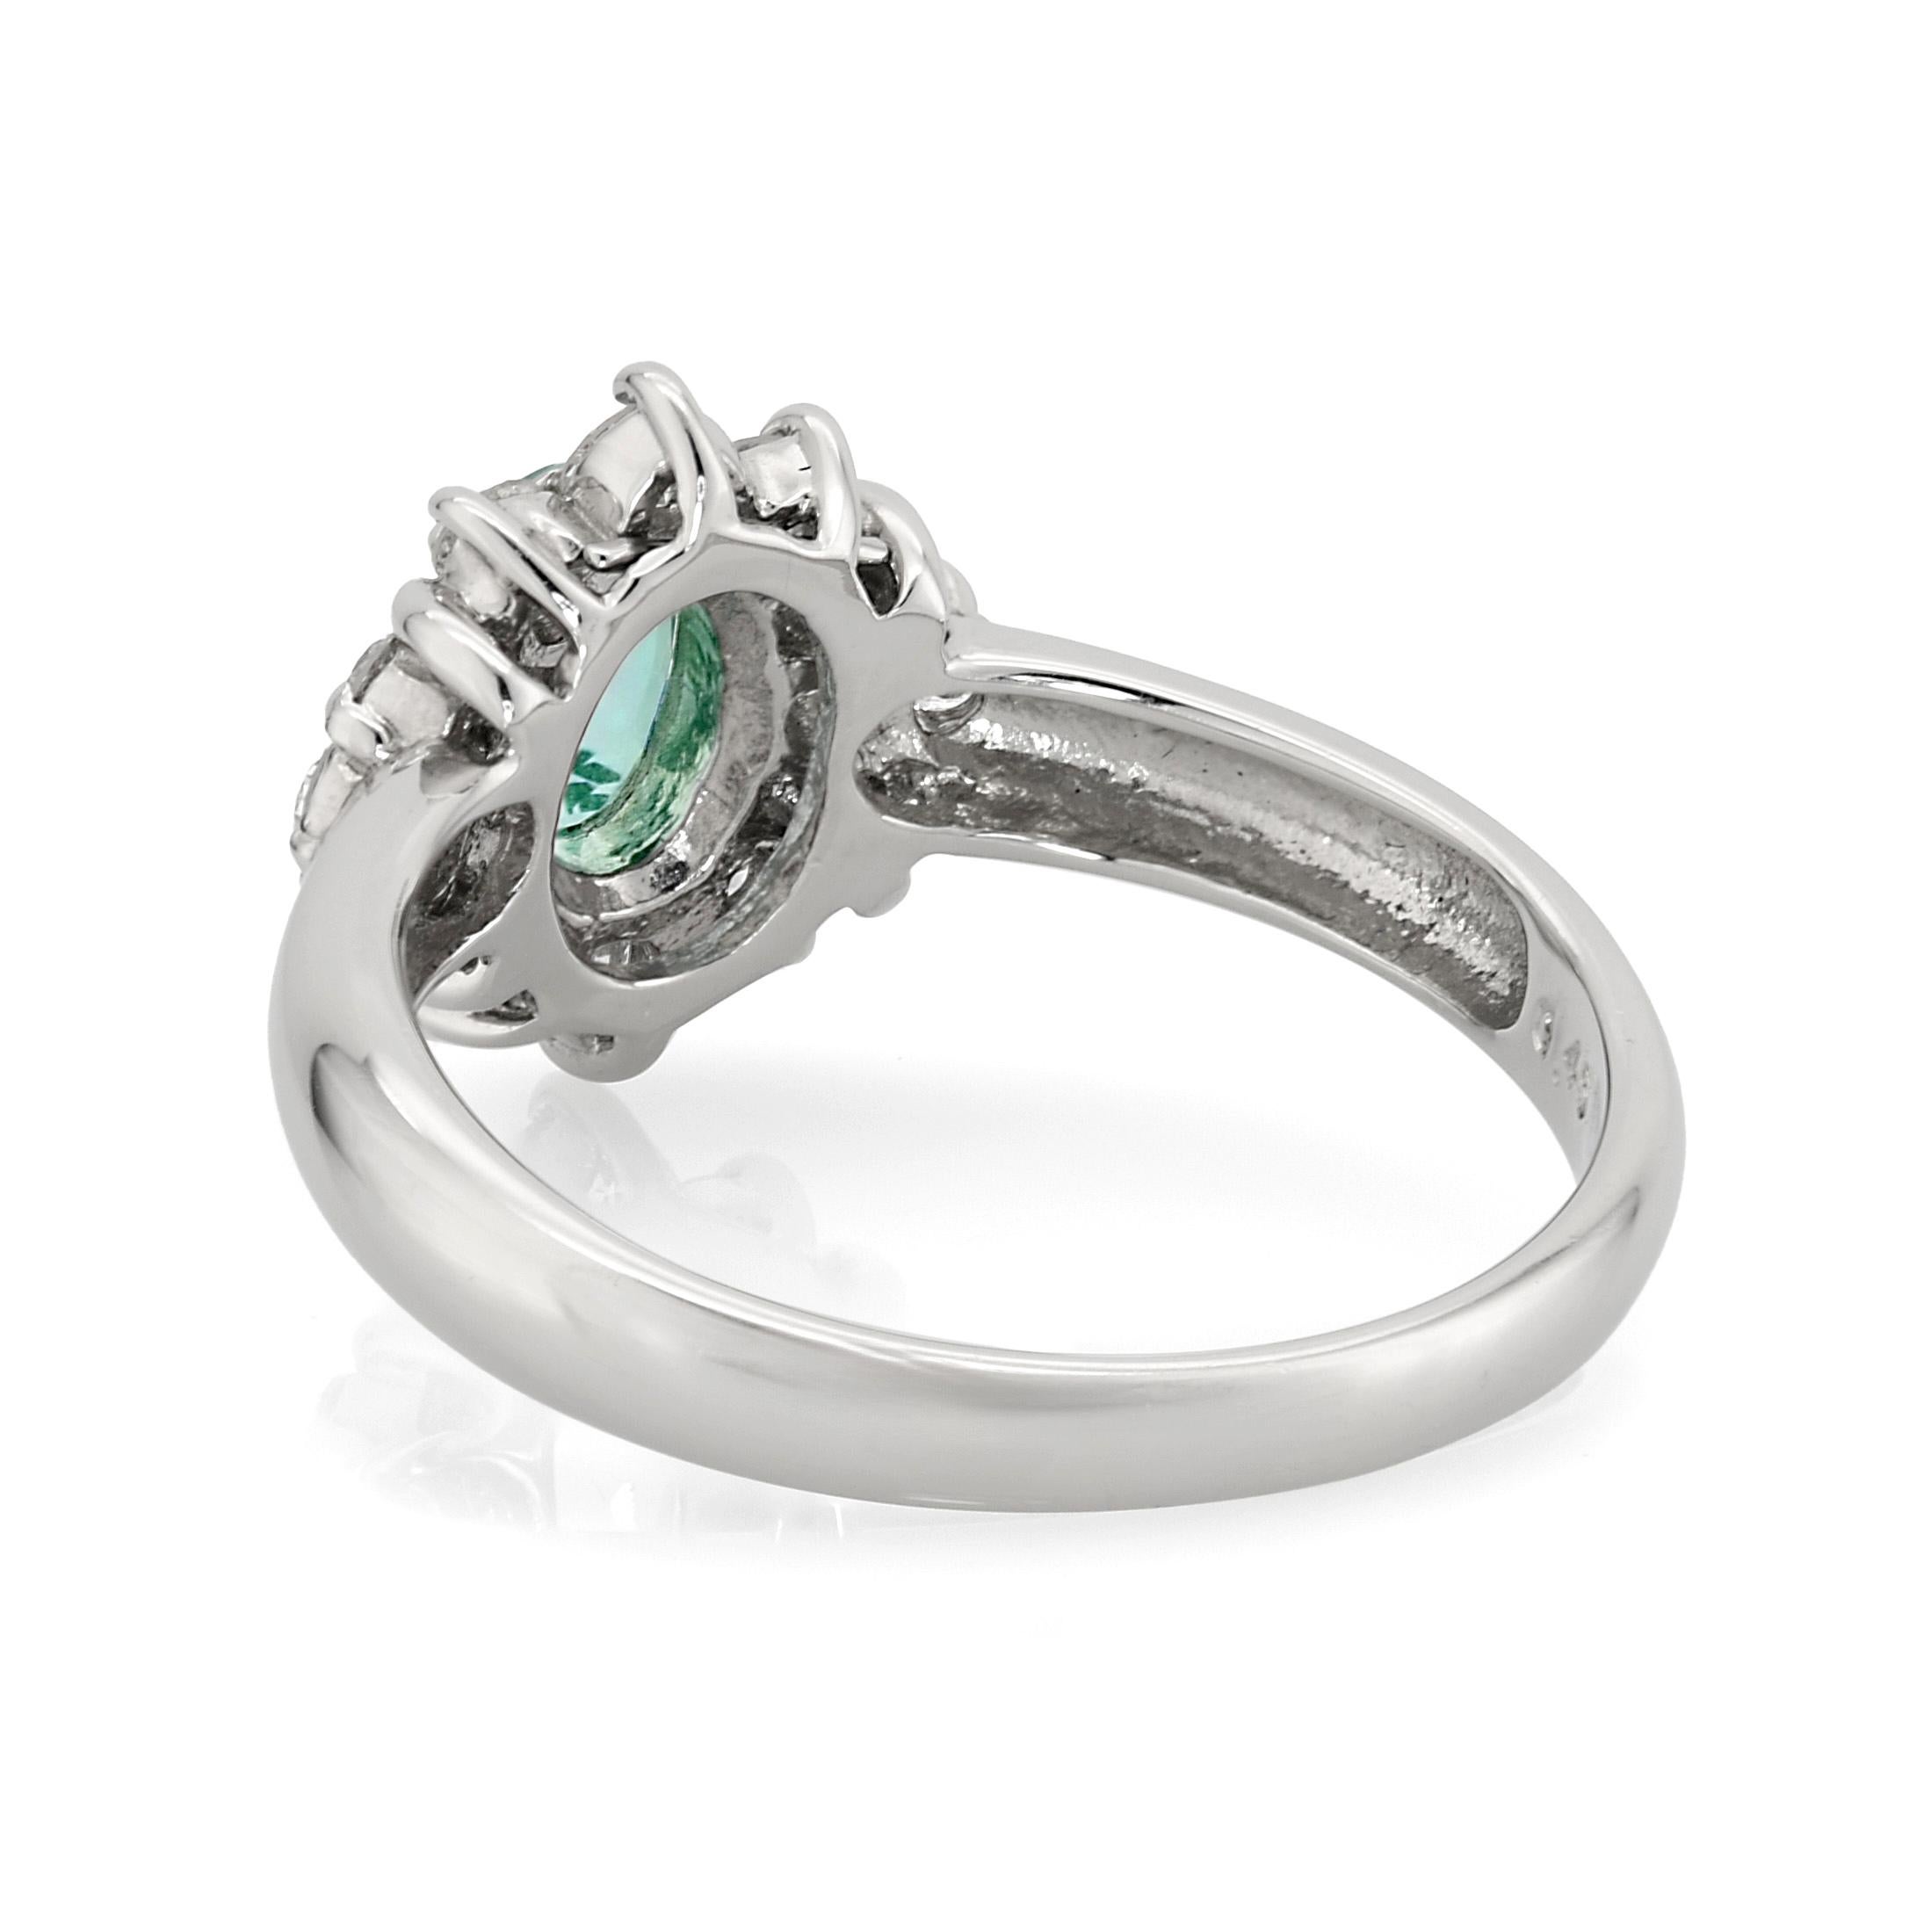 GIA Certified 0.45 Carats Paraiba Tourmaline Diamonds set in Platinum Ring In New Condition For Sale In Los Angeles, CA